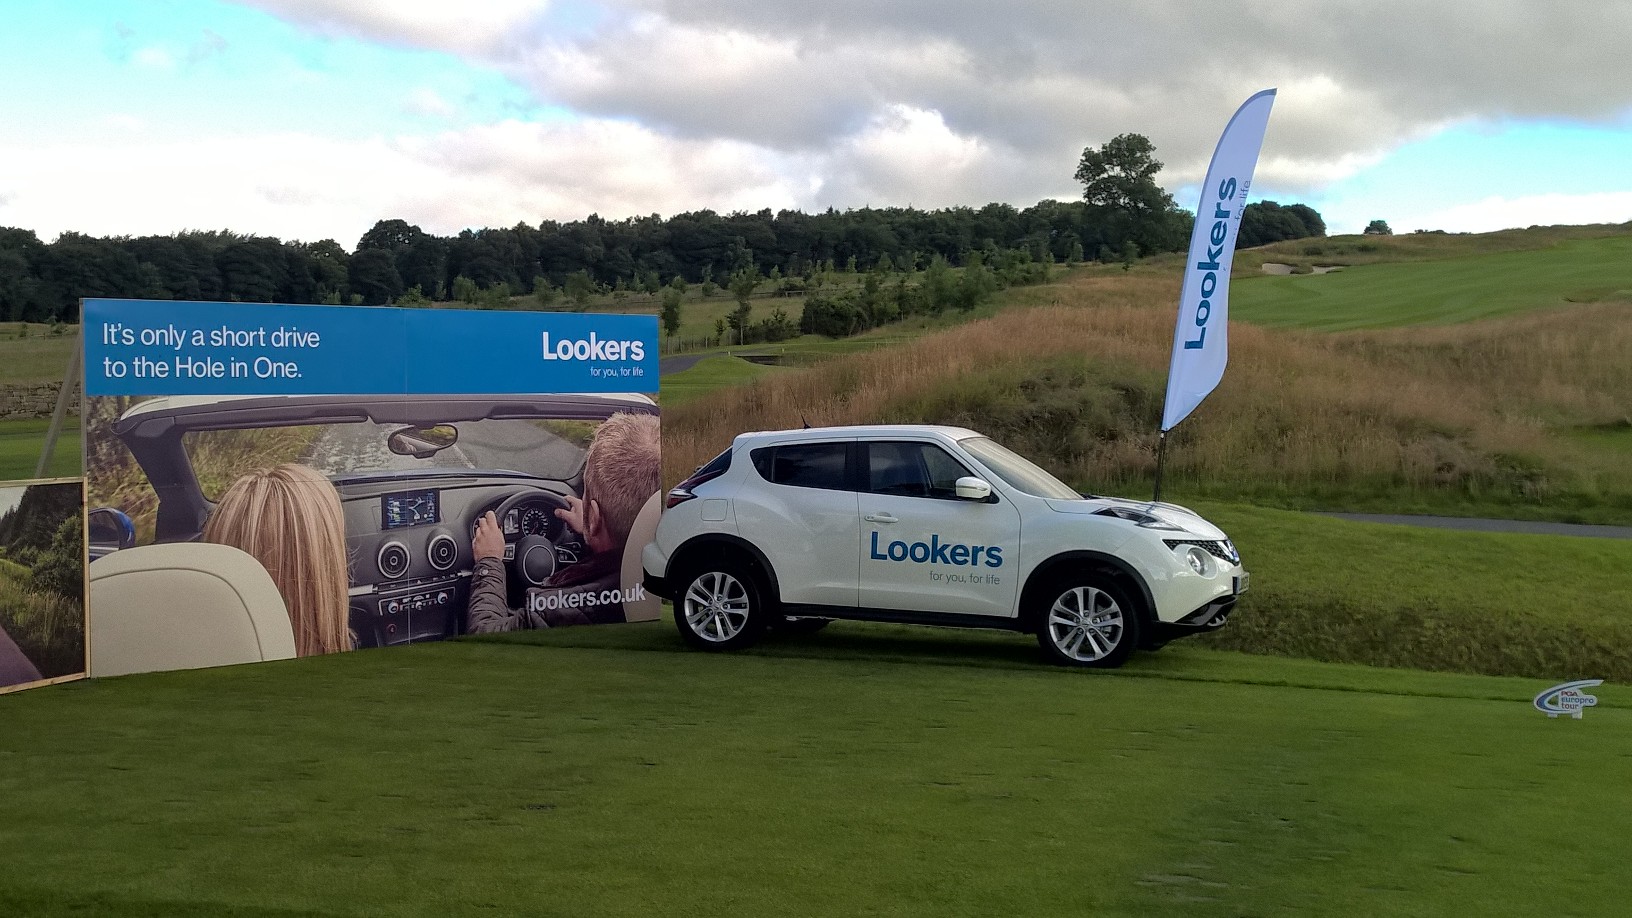 Hole in One competition on each day of the competition. Players can win a Nissan Juke, VW Polo and an Audi A1 at the event.